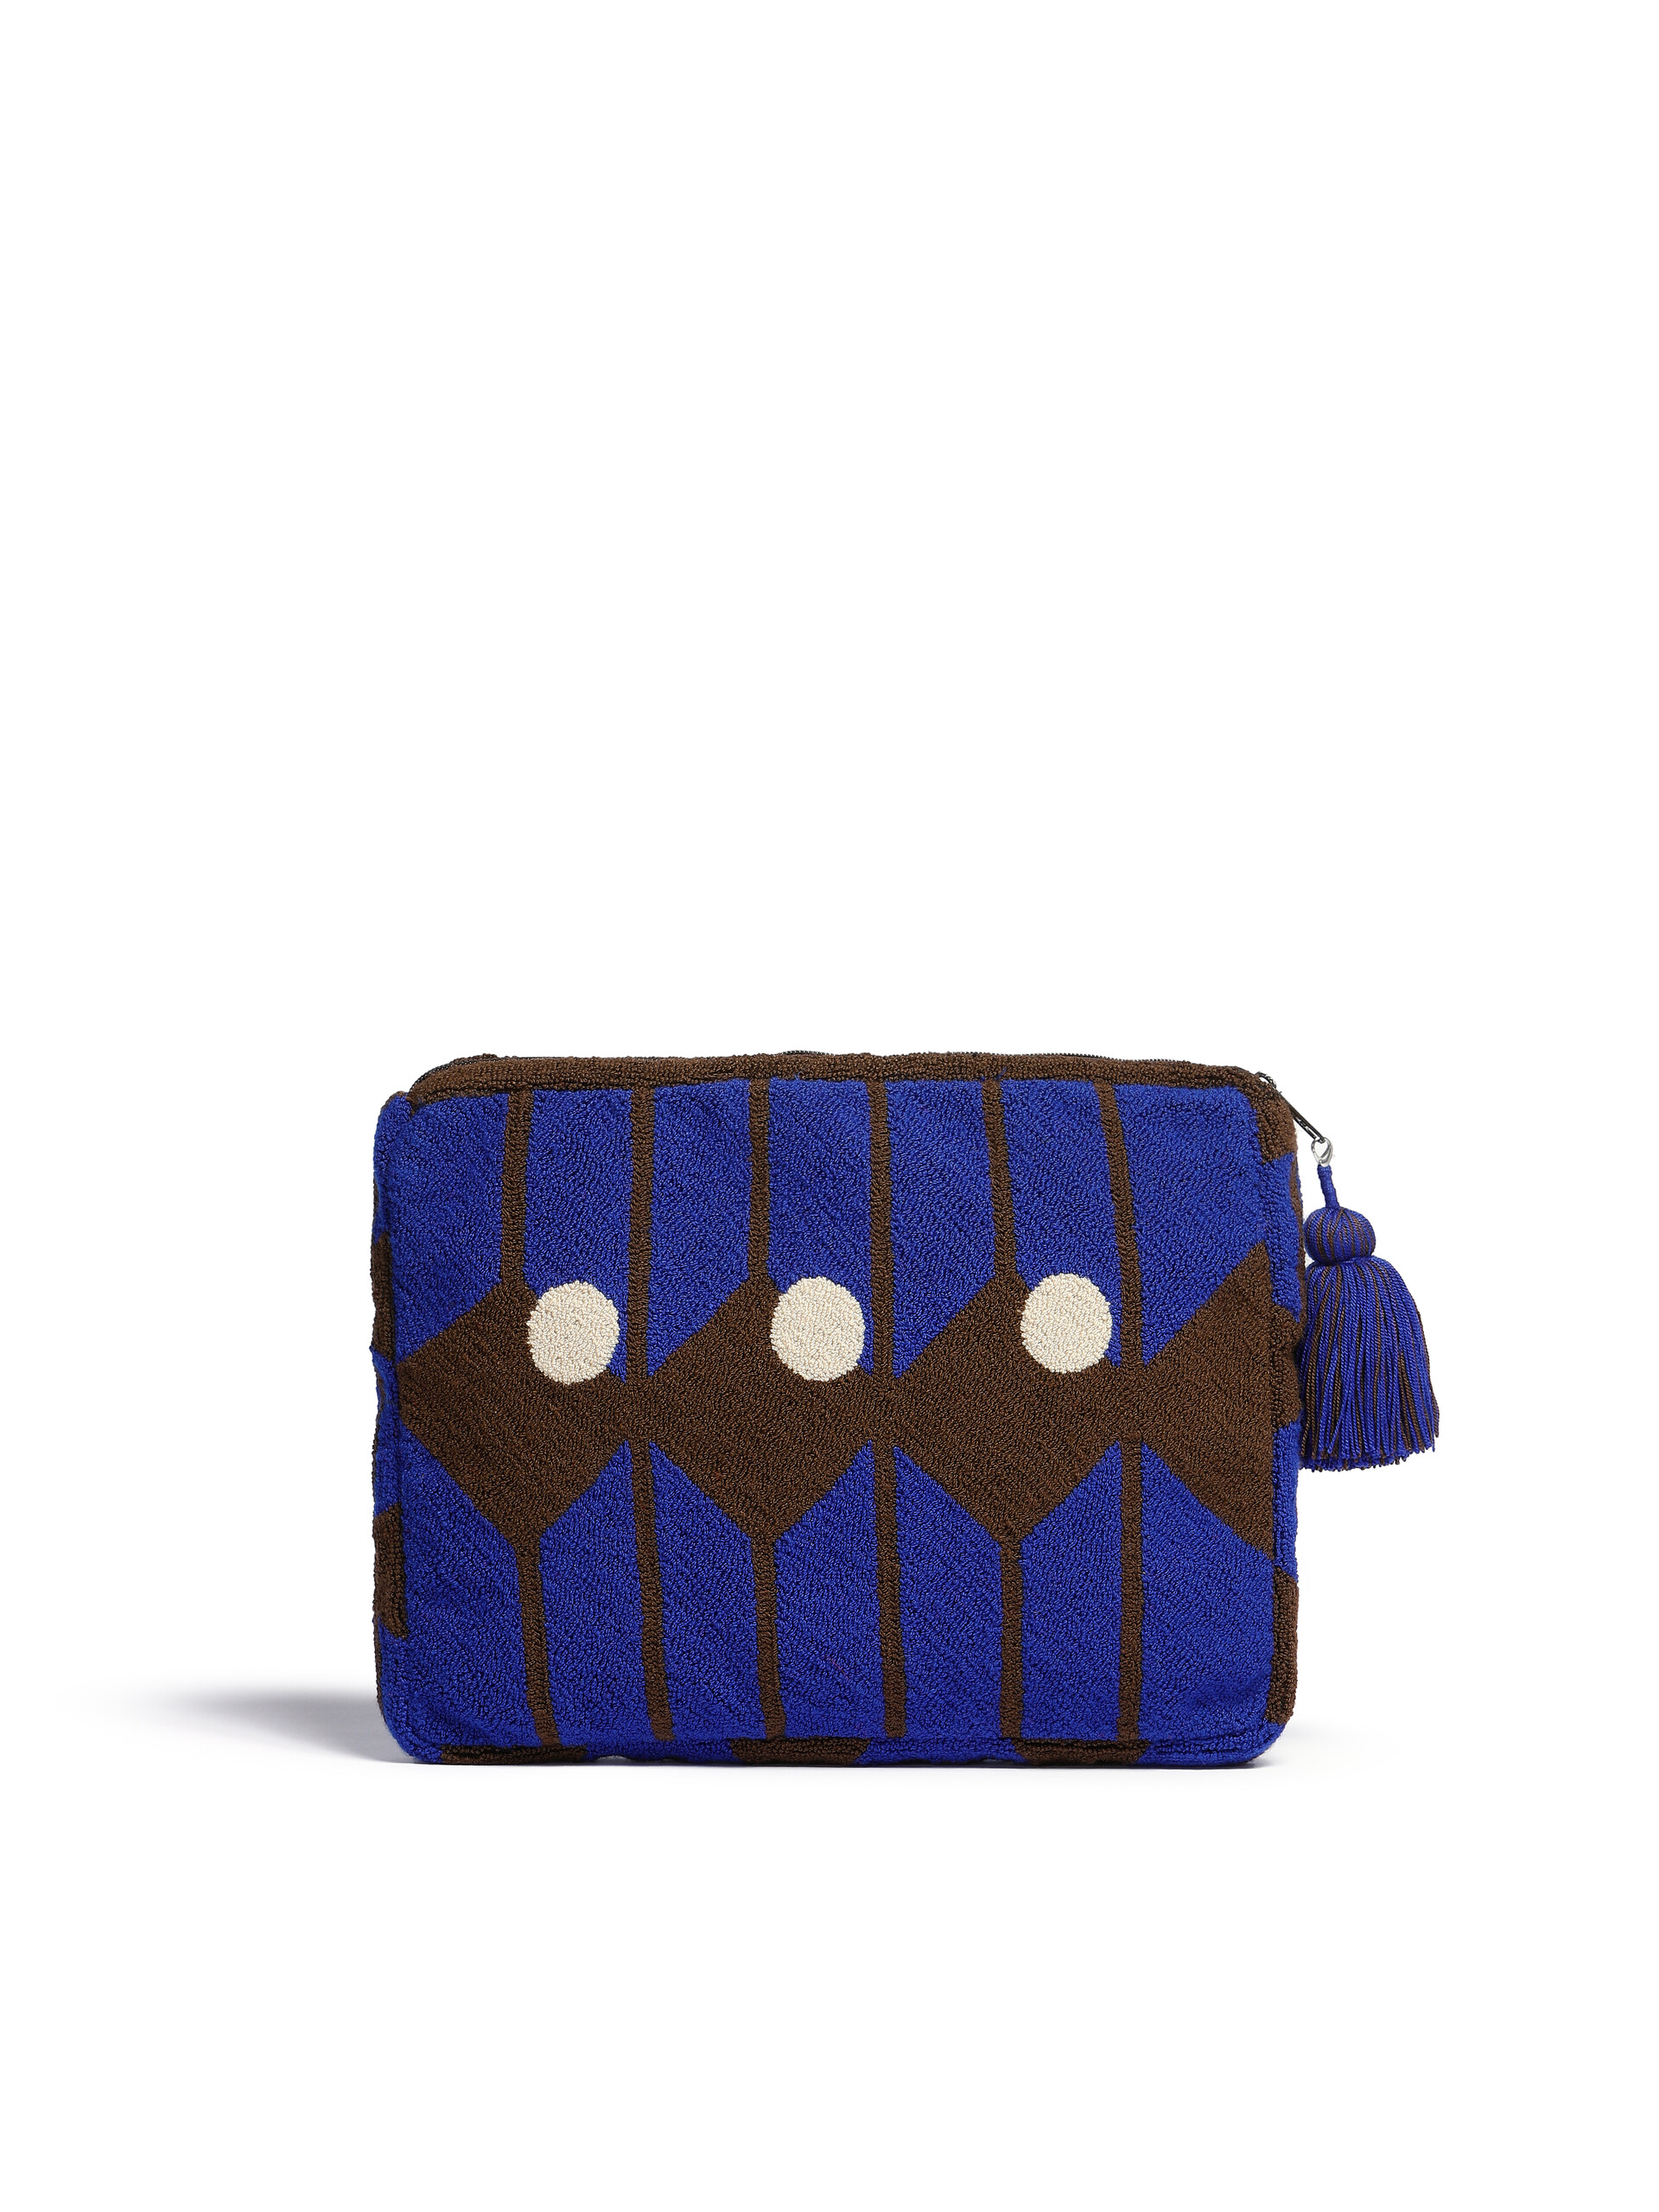 Blue and brown Marni Market wool laptop case - Accessories - Image 3